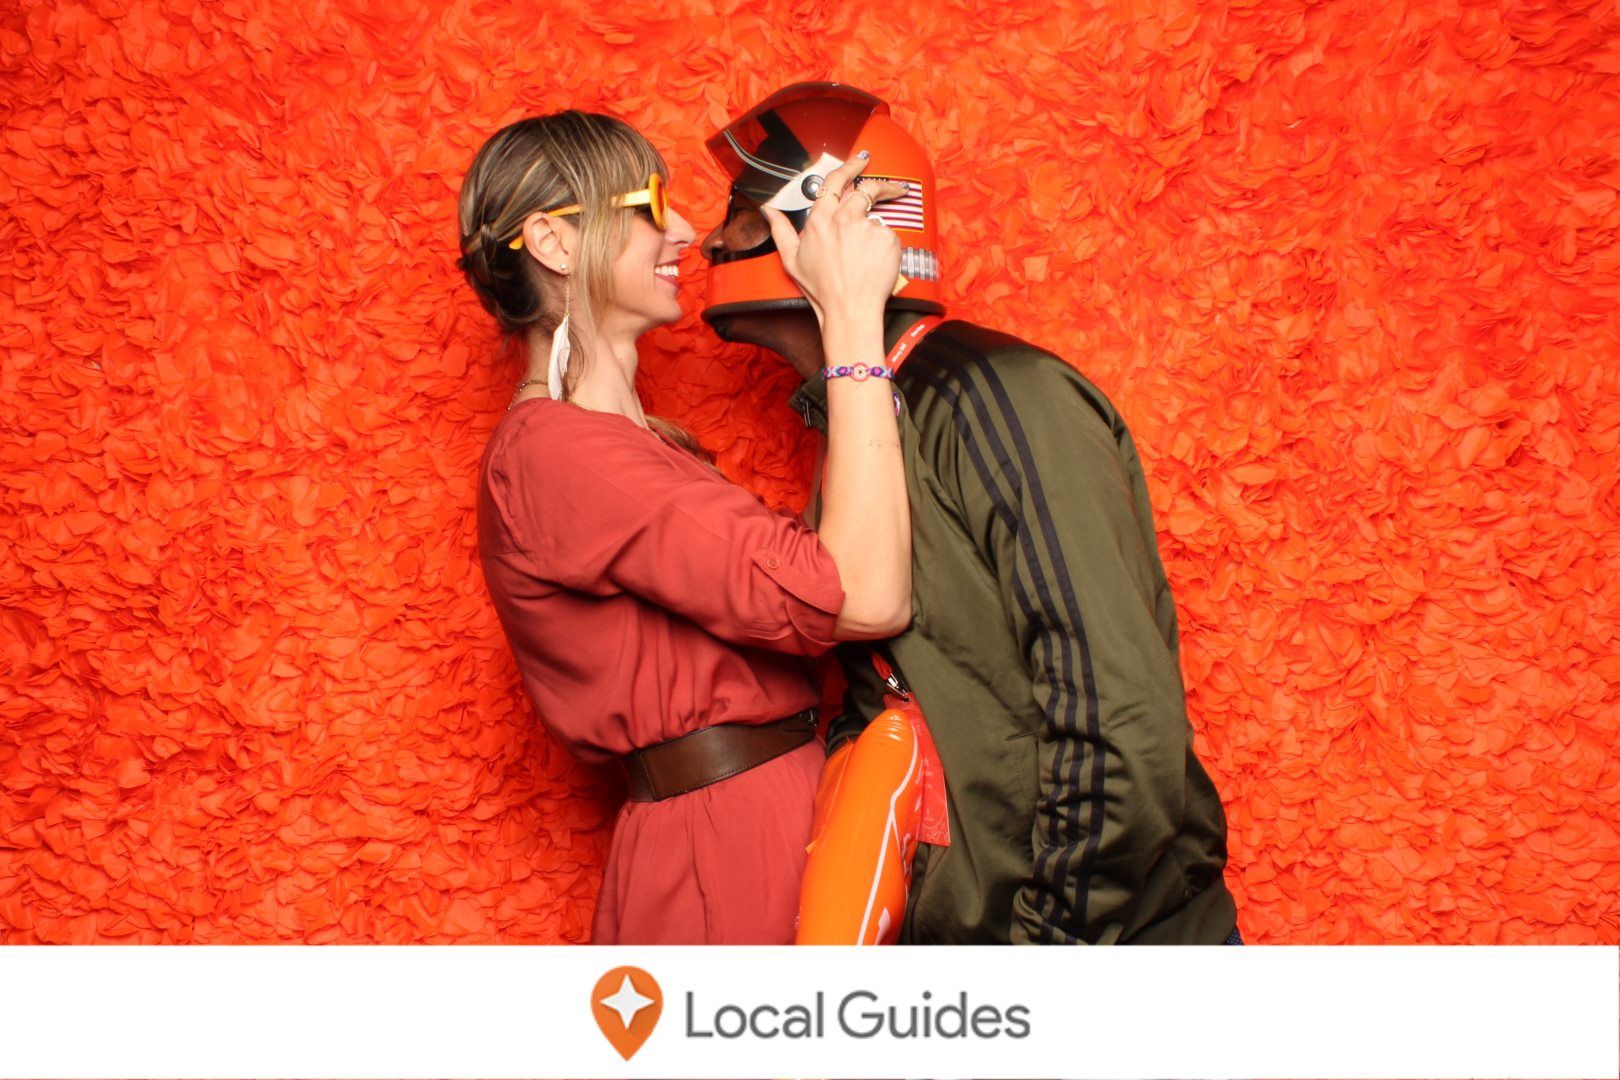 Caption: A photo of Mark and me embracing in front of an orange wall at Connect Live 2018.